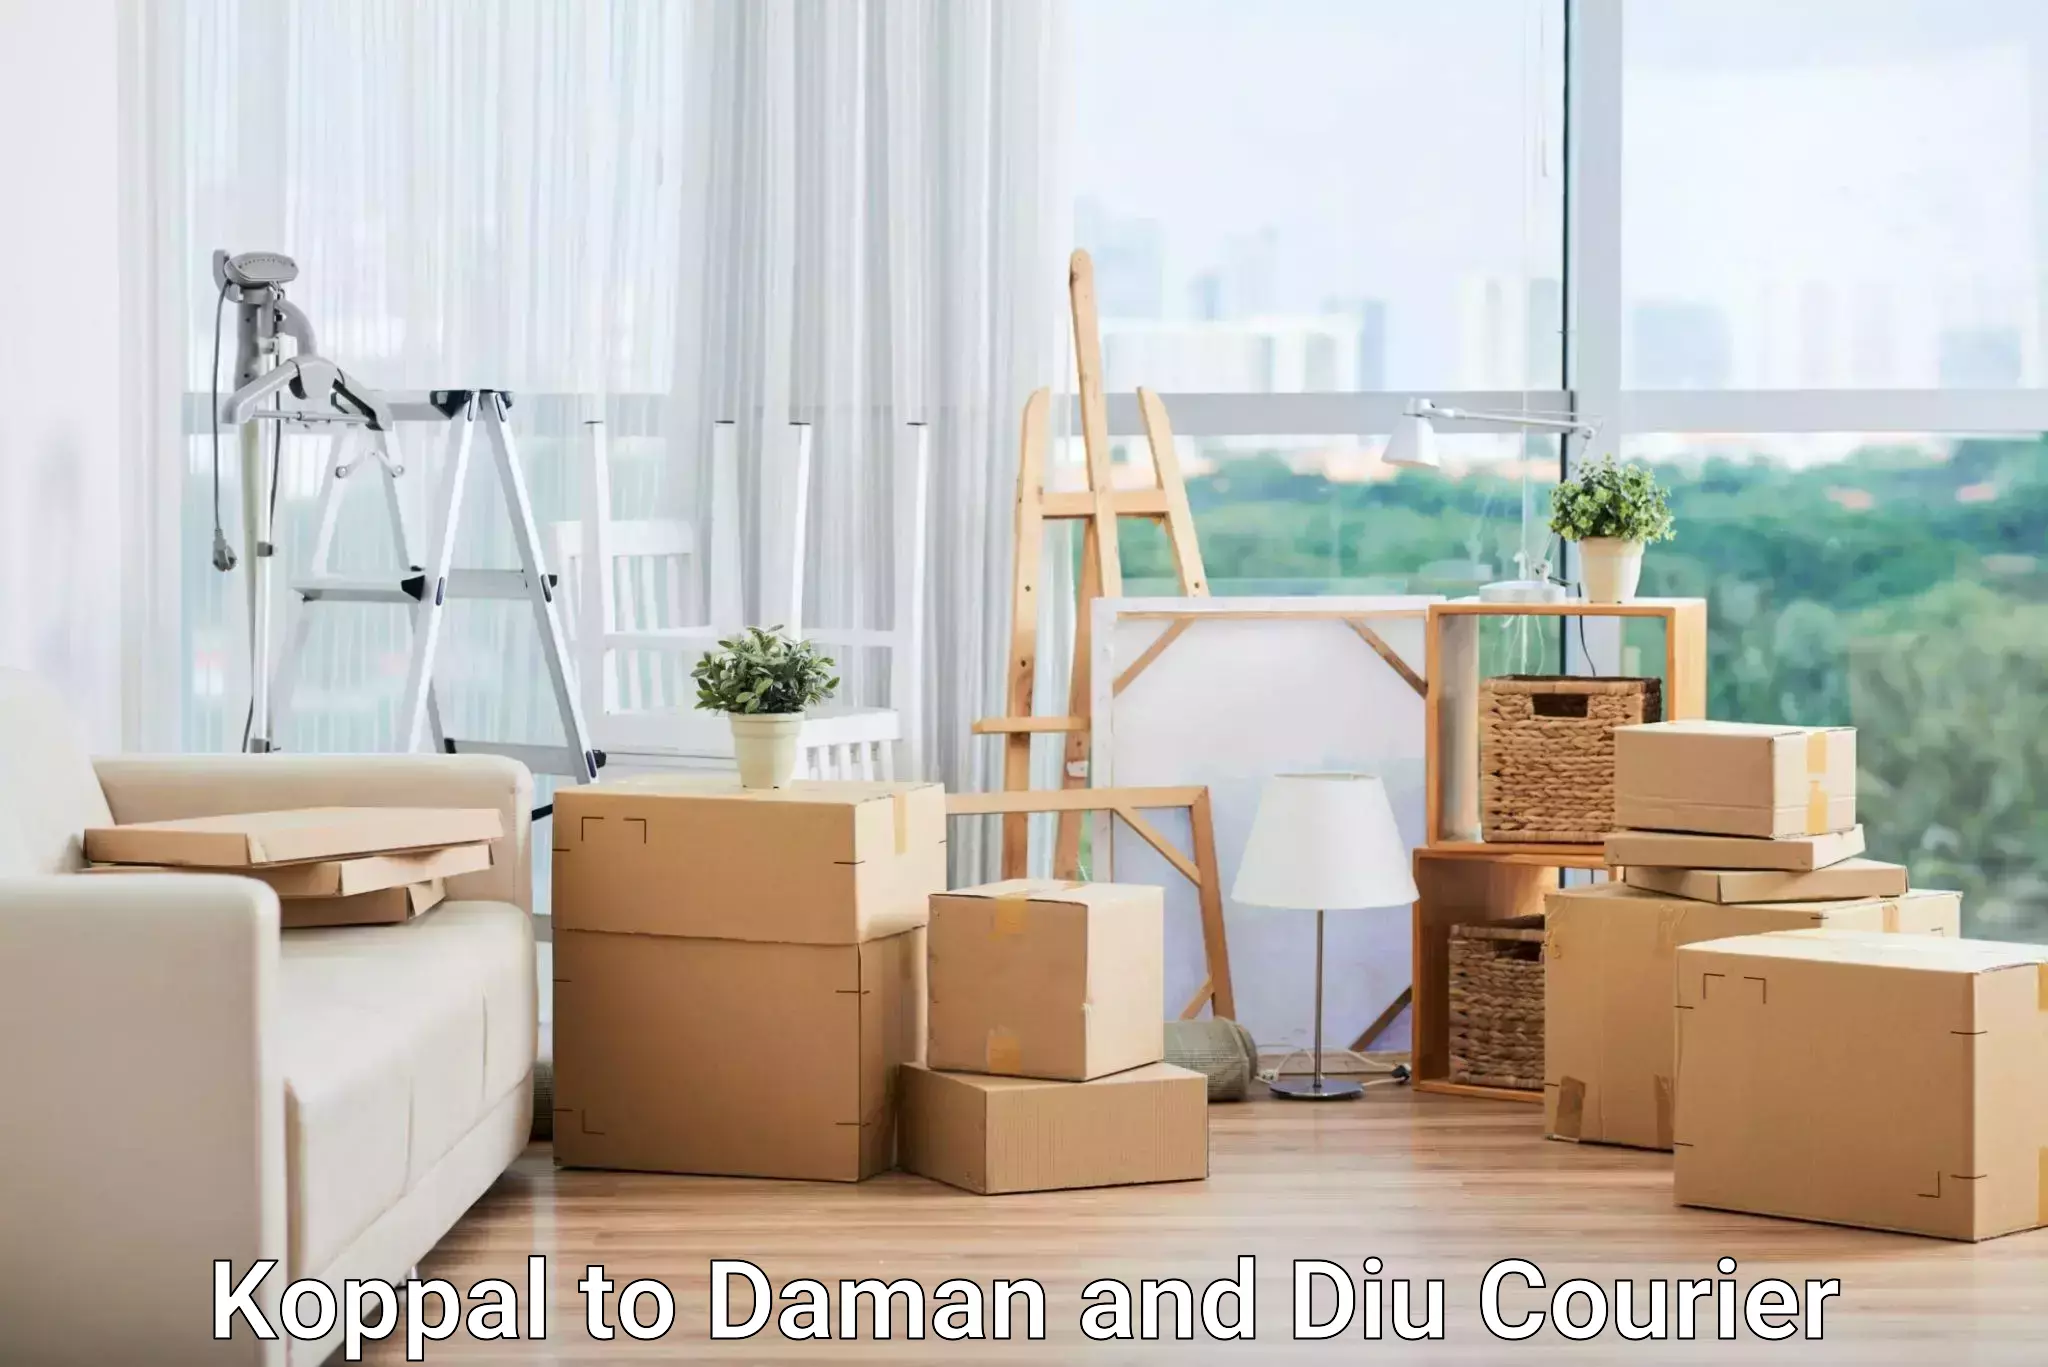 Quality courier partnerships Koppal to Daman and Diu